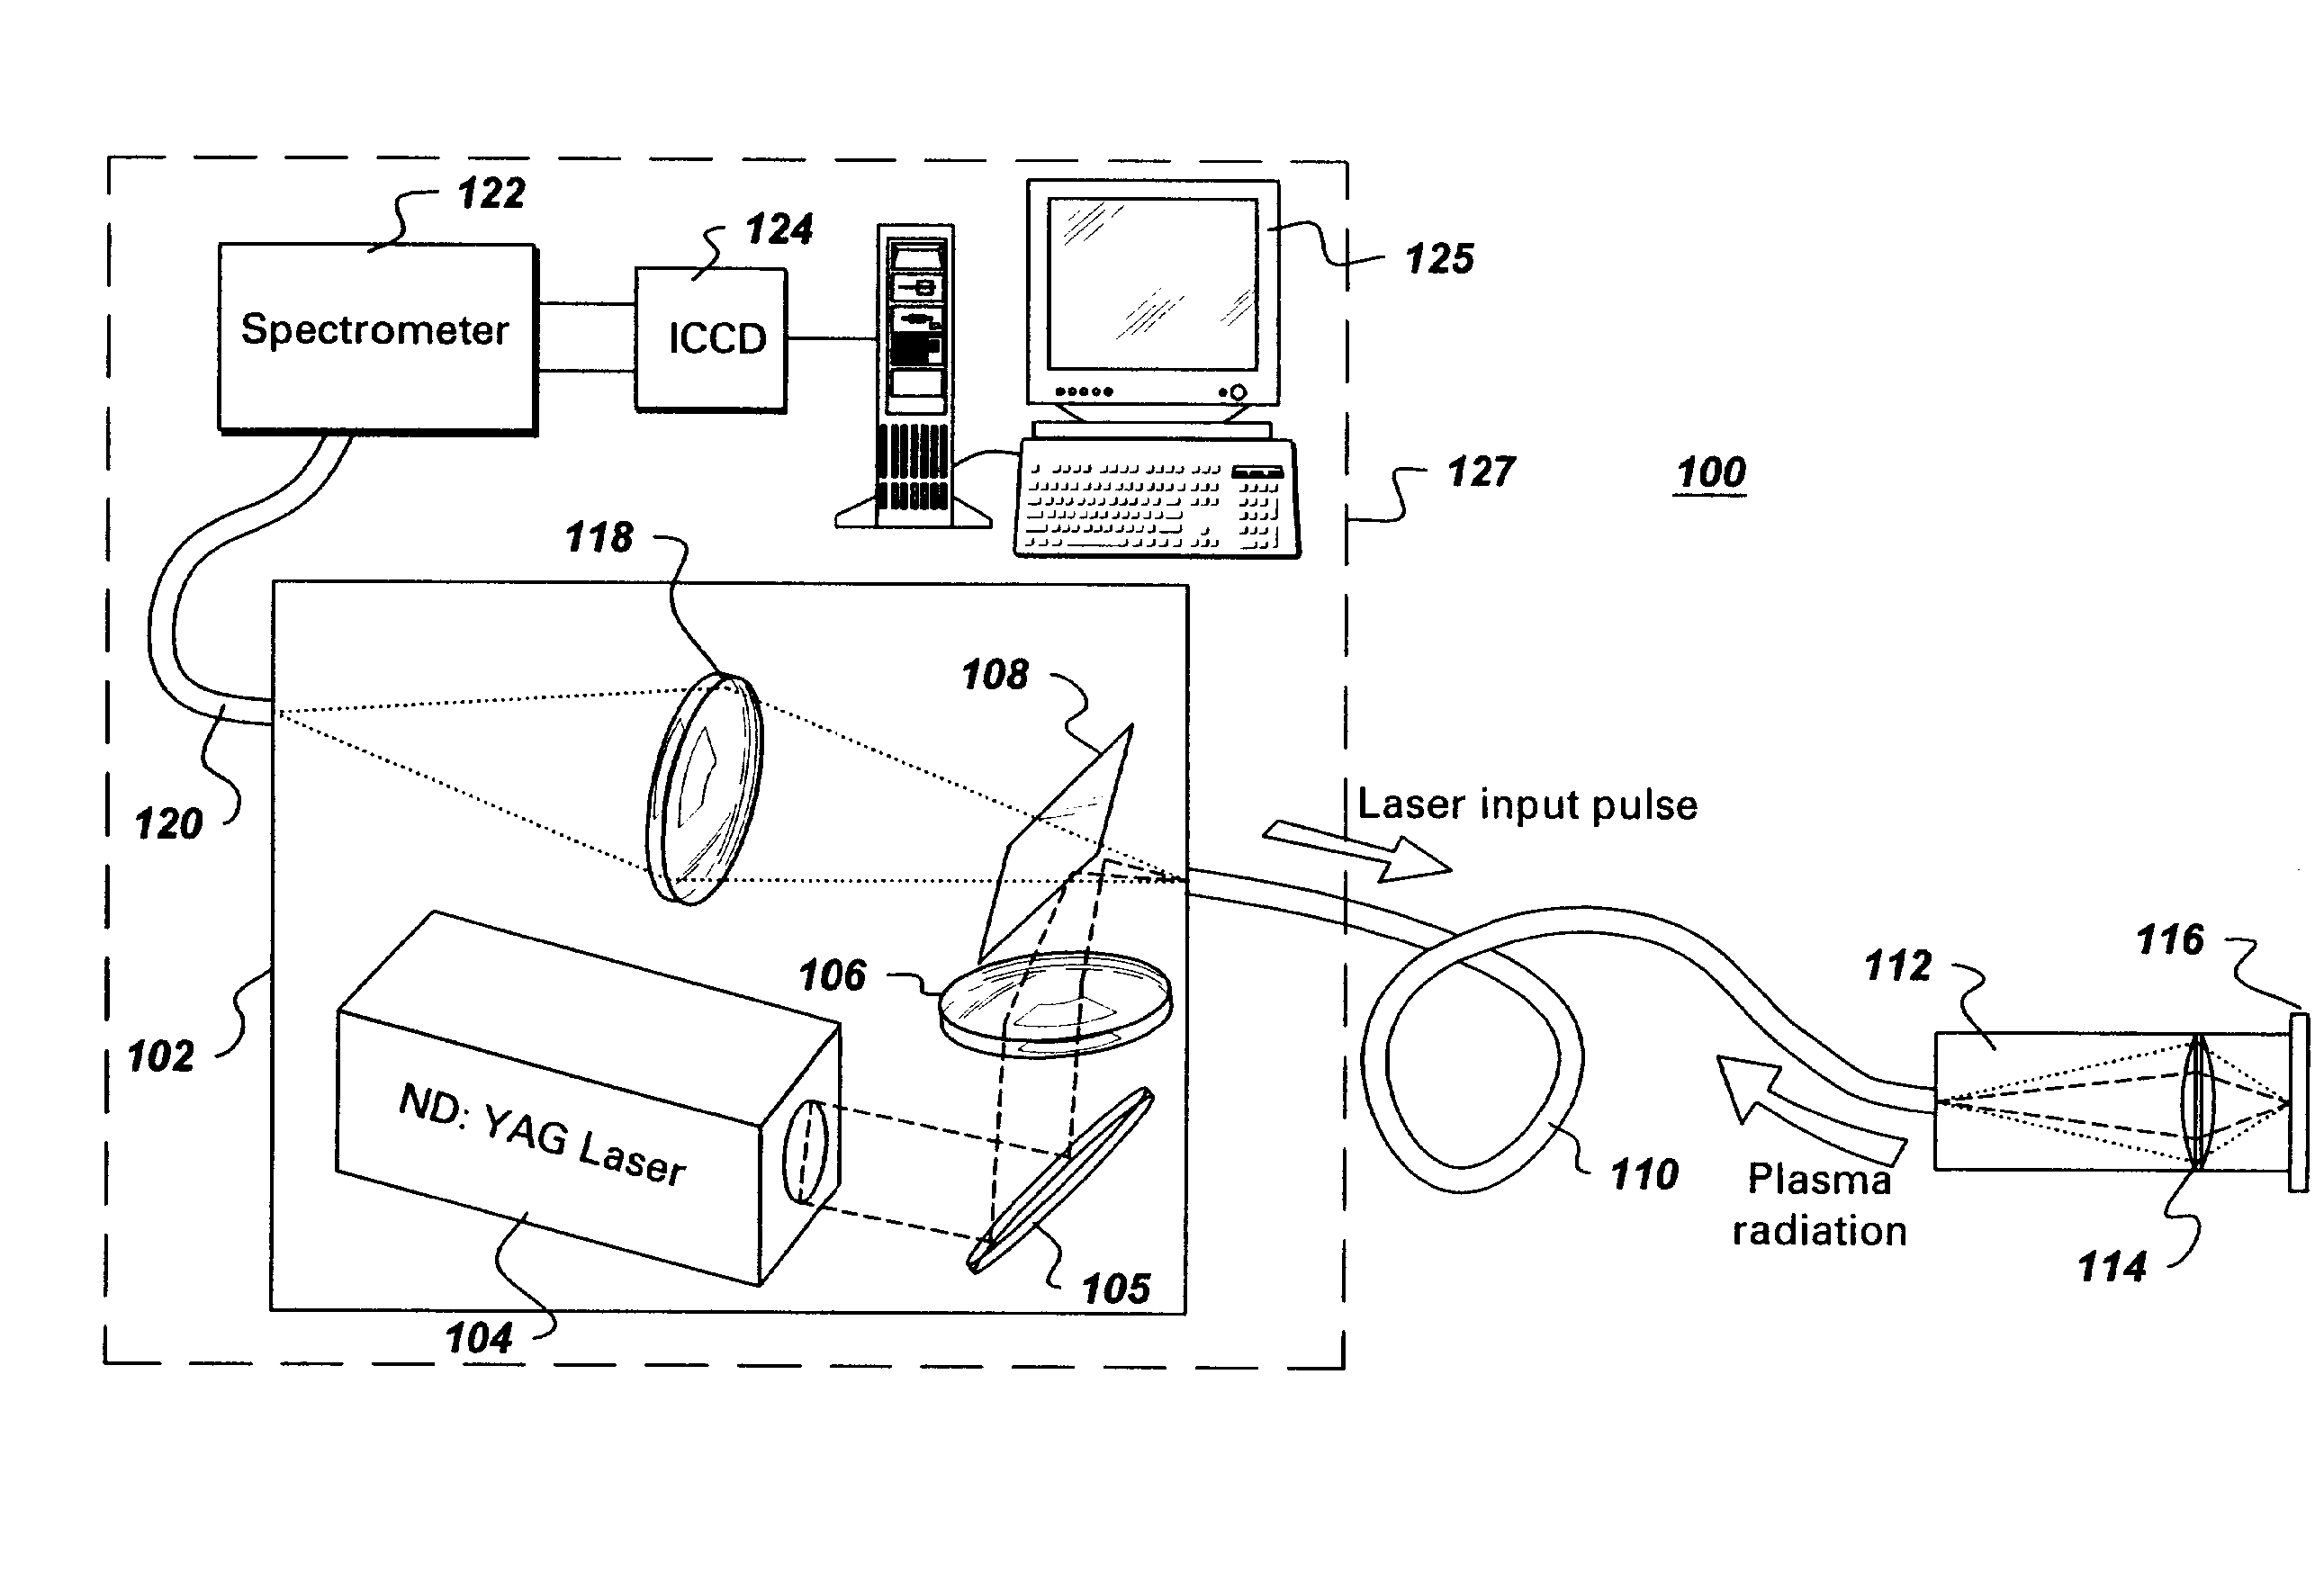 Fiber optical apparatus and system for in situ laser plasma spectroscopy